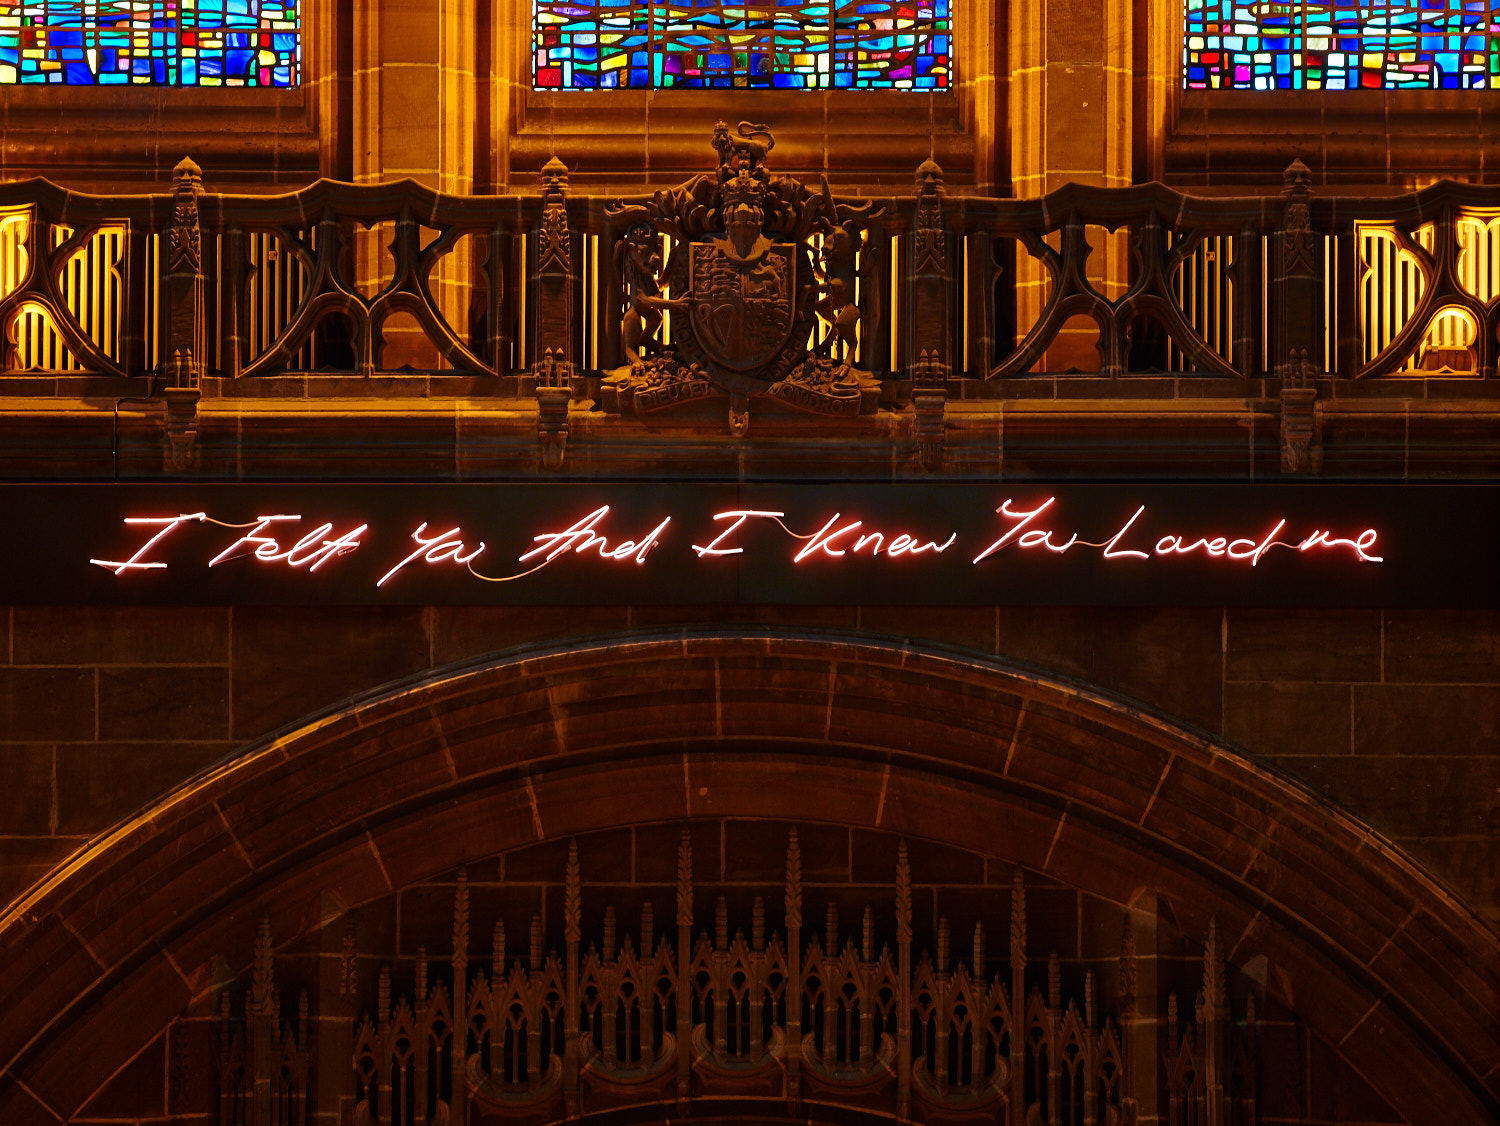 'For You' Liverpool Cathedral, artist Tracey Emin